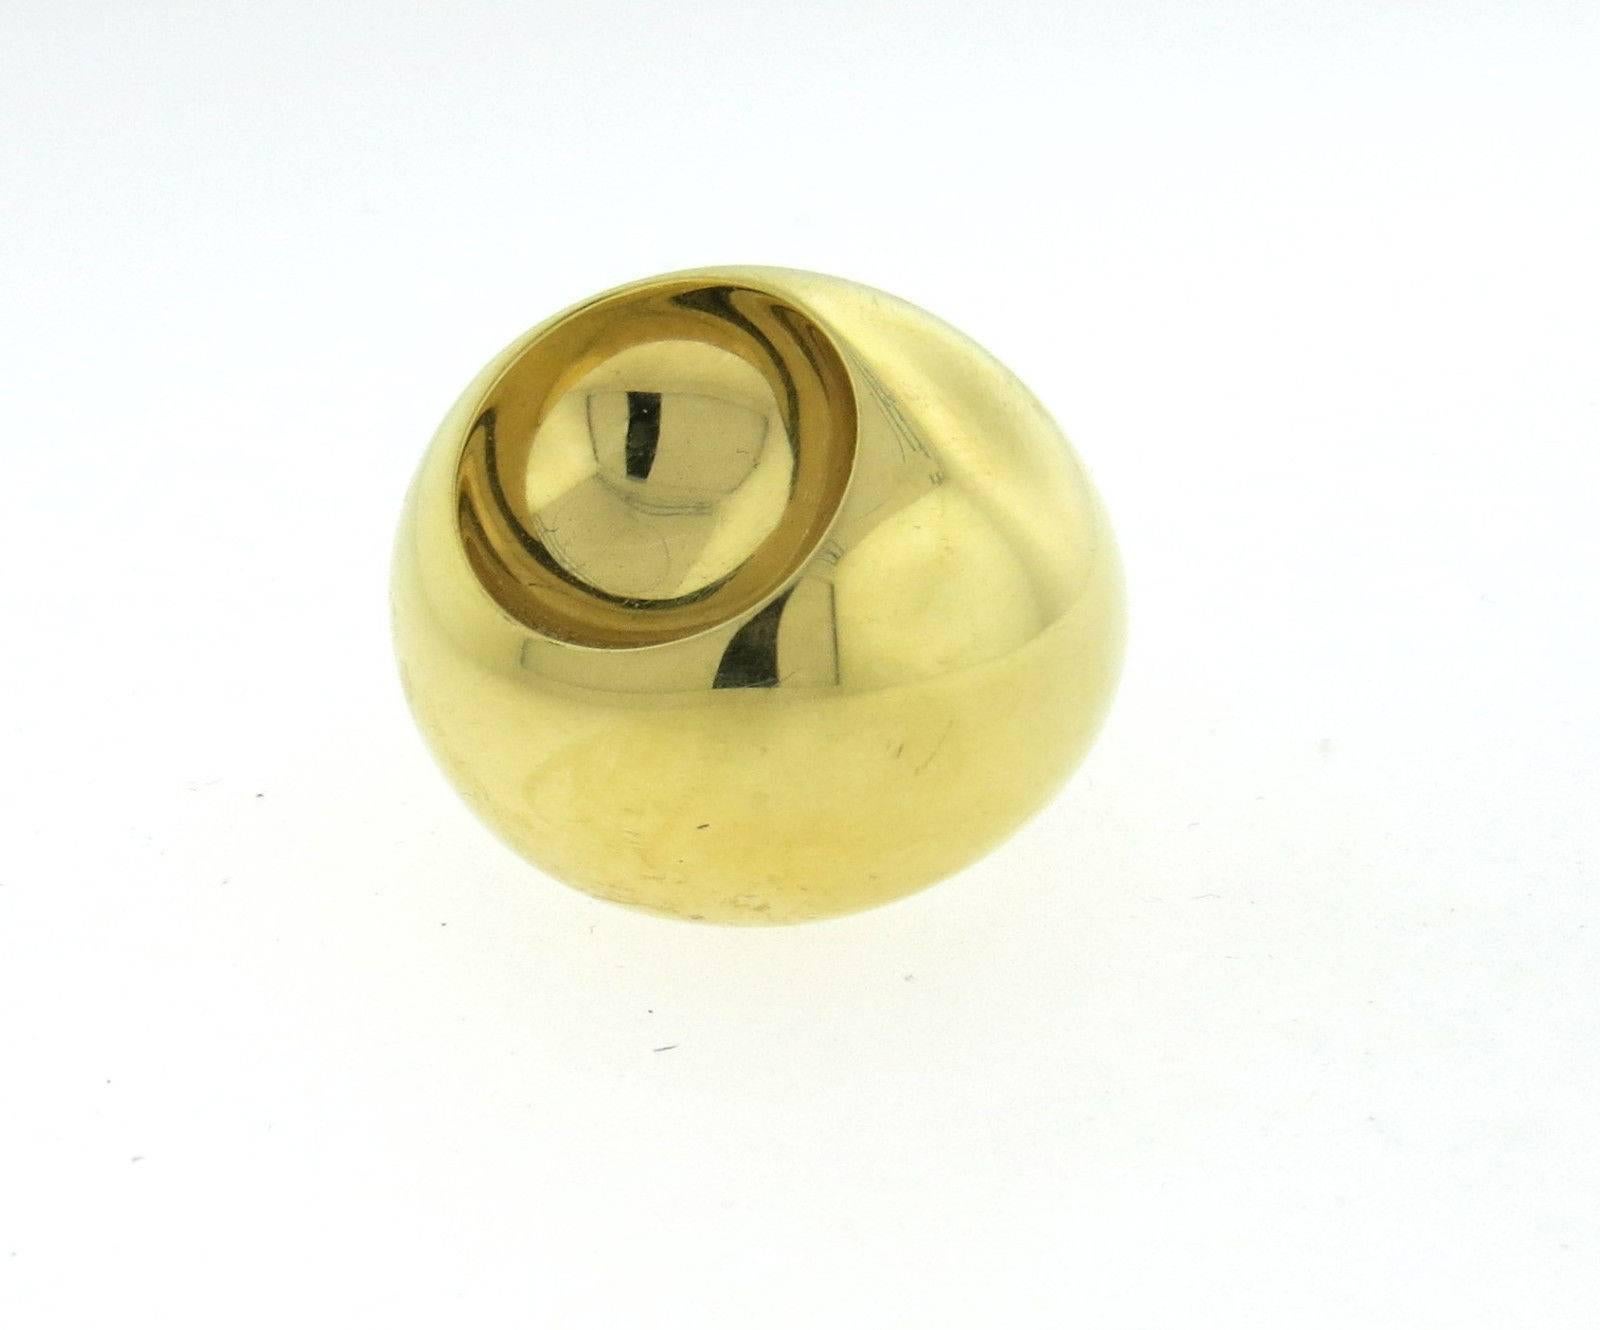 An 18k yellow gold dome ring.  Crafted by Georg Jensen, the ring is a size 6, ring top is 23mm x 27mm, sits approx. 15mm from the finger. Marked: GJ mark, 1509, 750.  The weight of the ring is 27.5 grams.